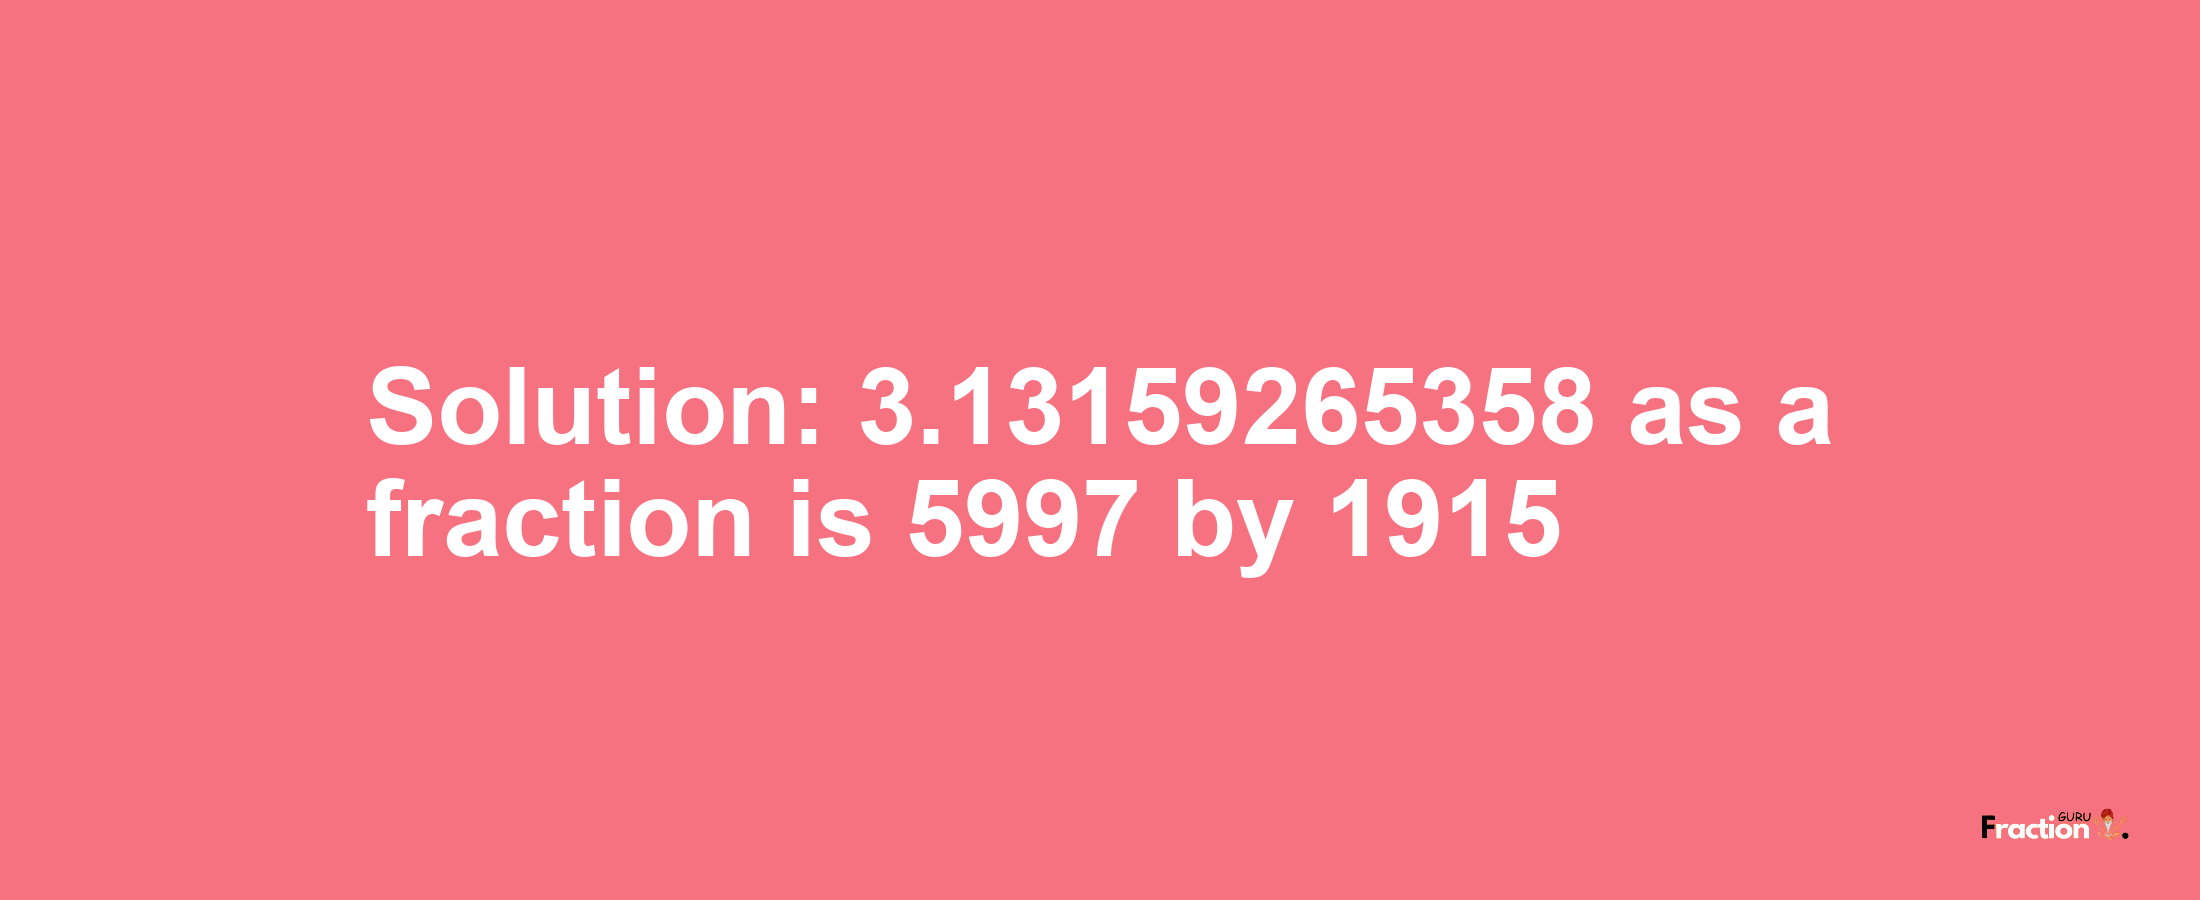 Solution:3.13159265358 as a fraction is 5997/1915